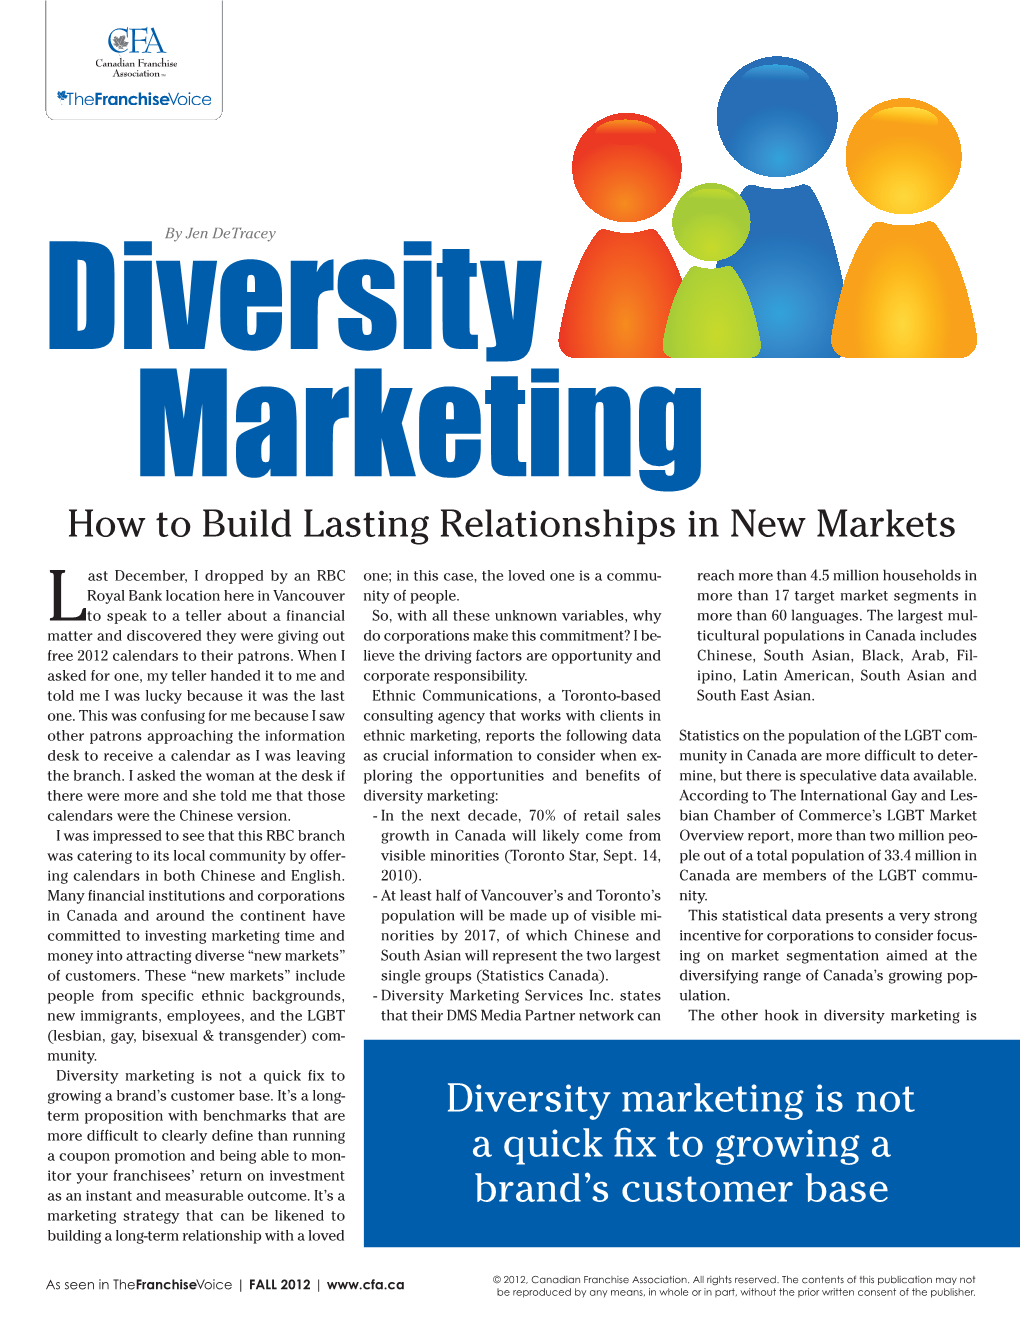 Diversity Marketing Is Not a Quick Fix to Growing a Brand's Customer Base